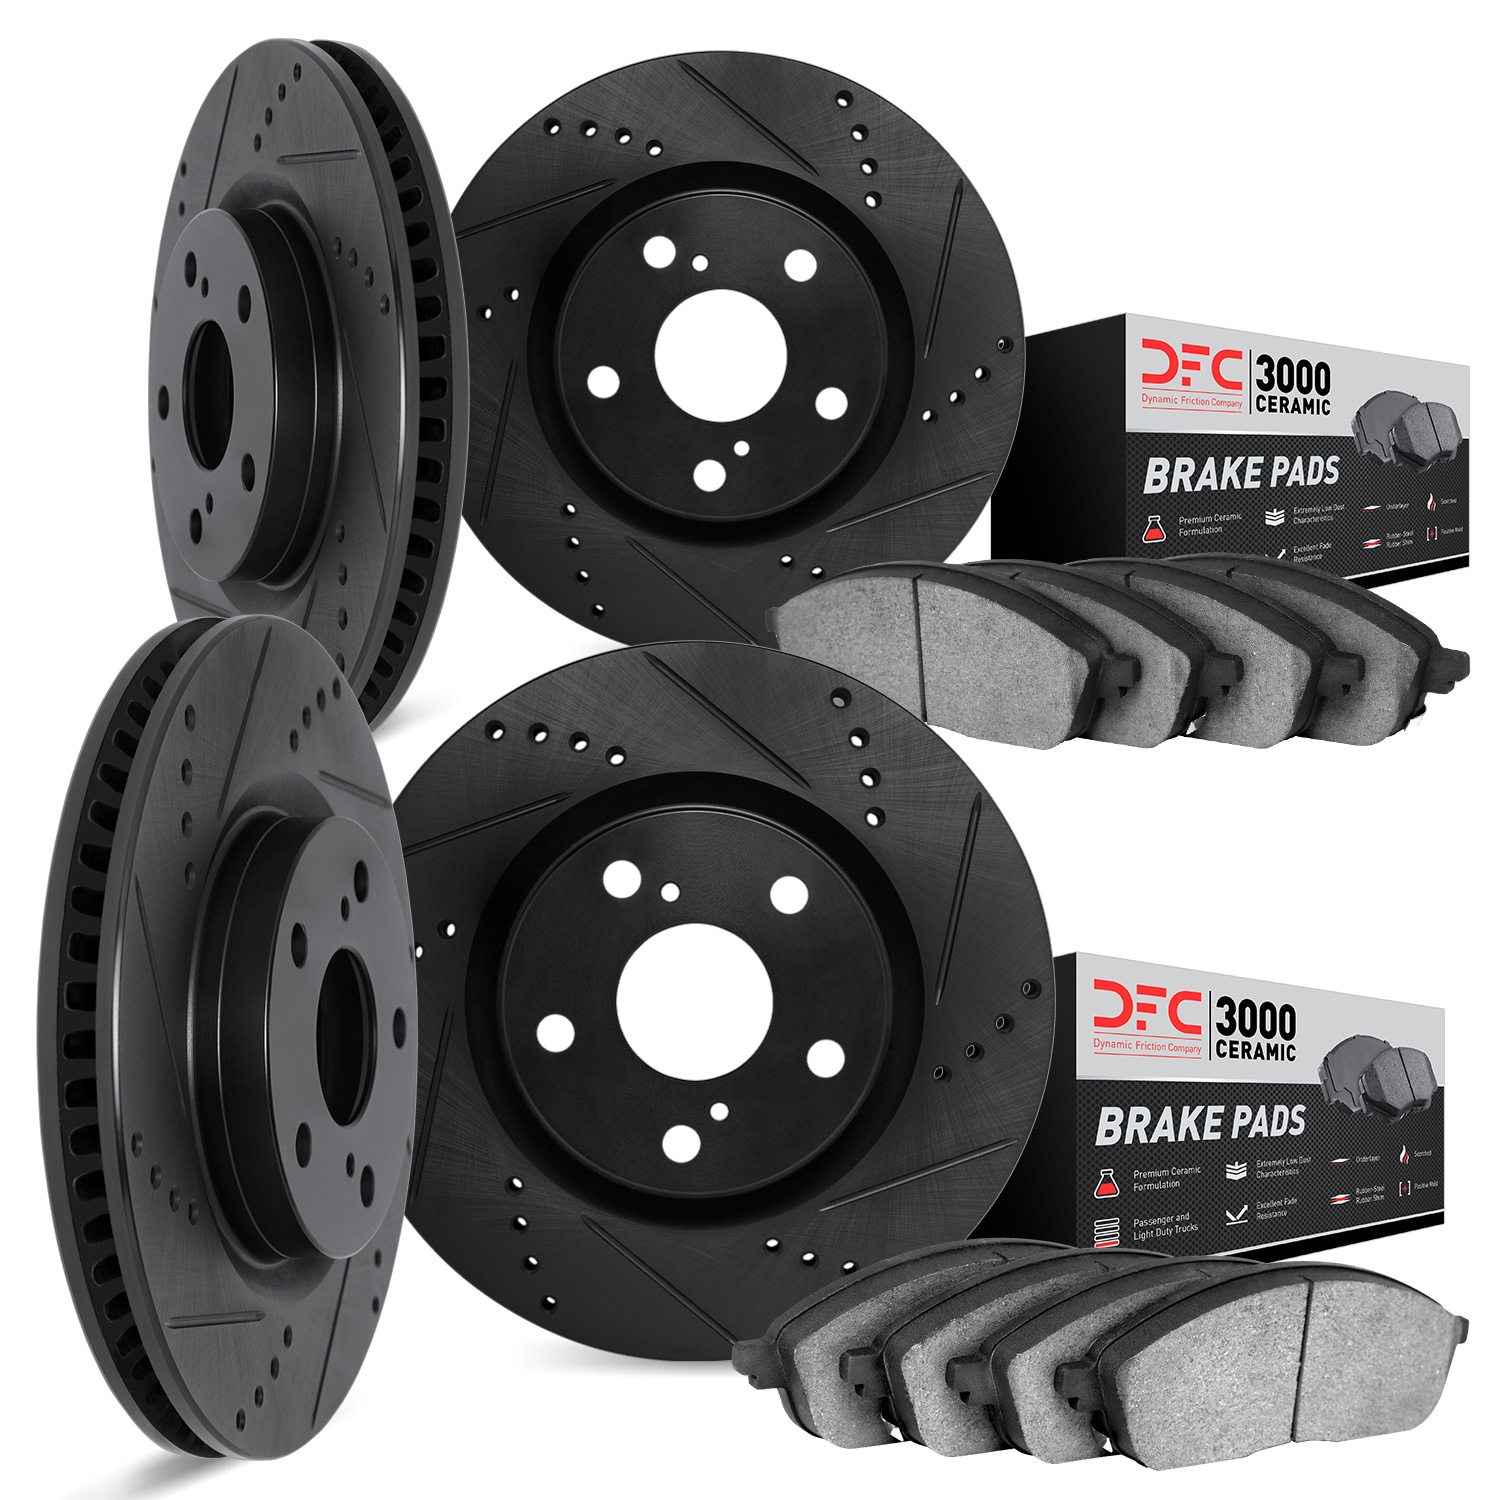 8304-40027 Drilled/Slotted Brake Rotors with 3000-Series Ceramic Brake Pads Kit [Black], 2006-2018 Mopar, Position: Front and Re